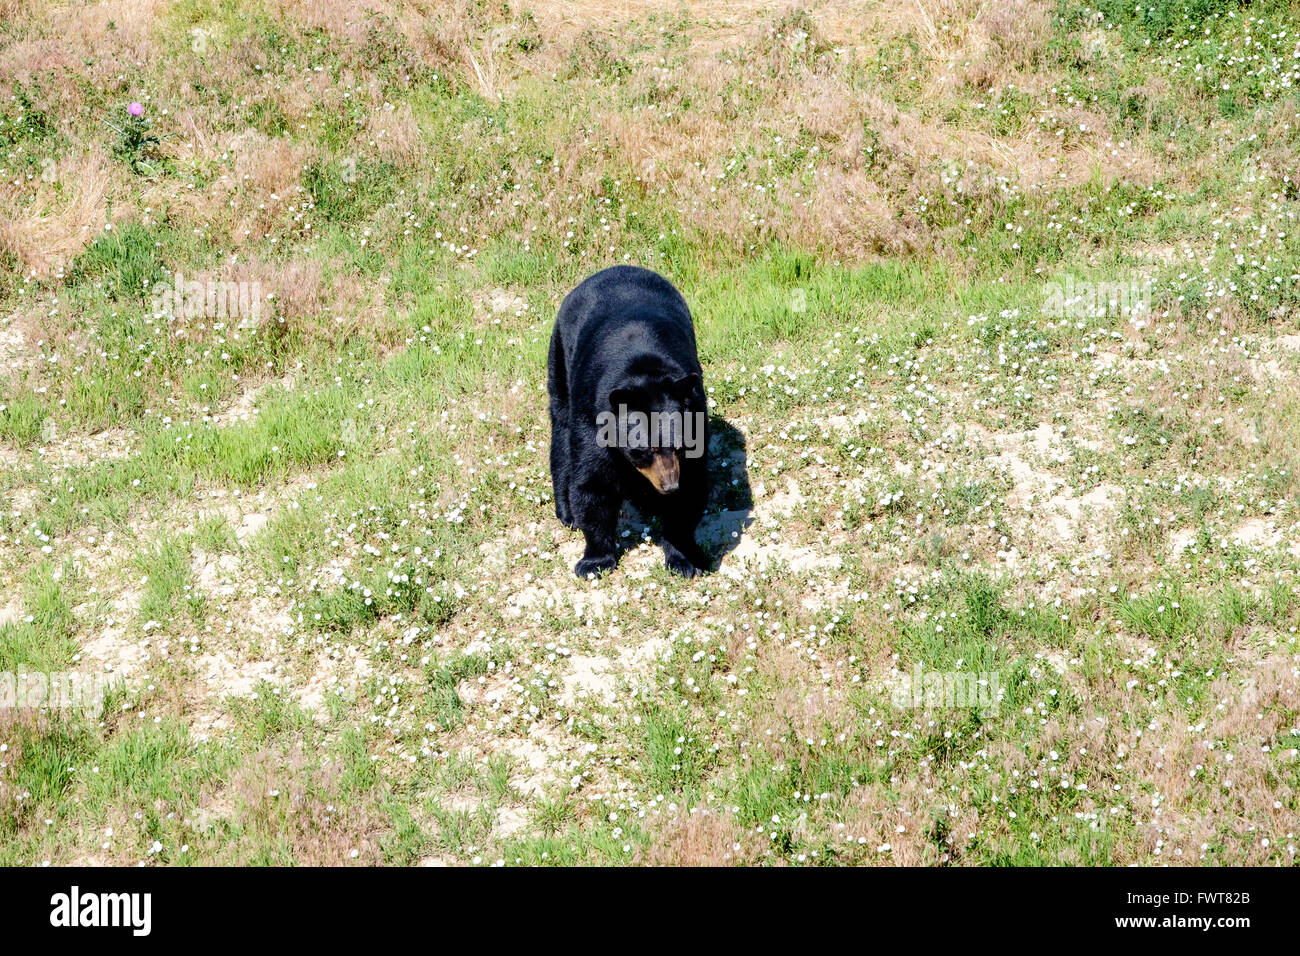 A black bear roams in his enclosure at the Wild Animal Sanctuary in Keenesburg, Colorado. Stock Photo